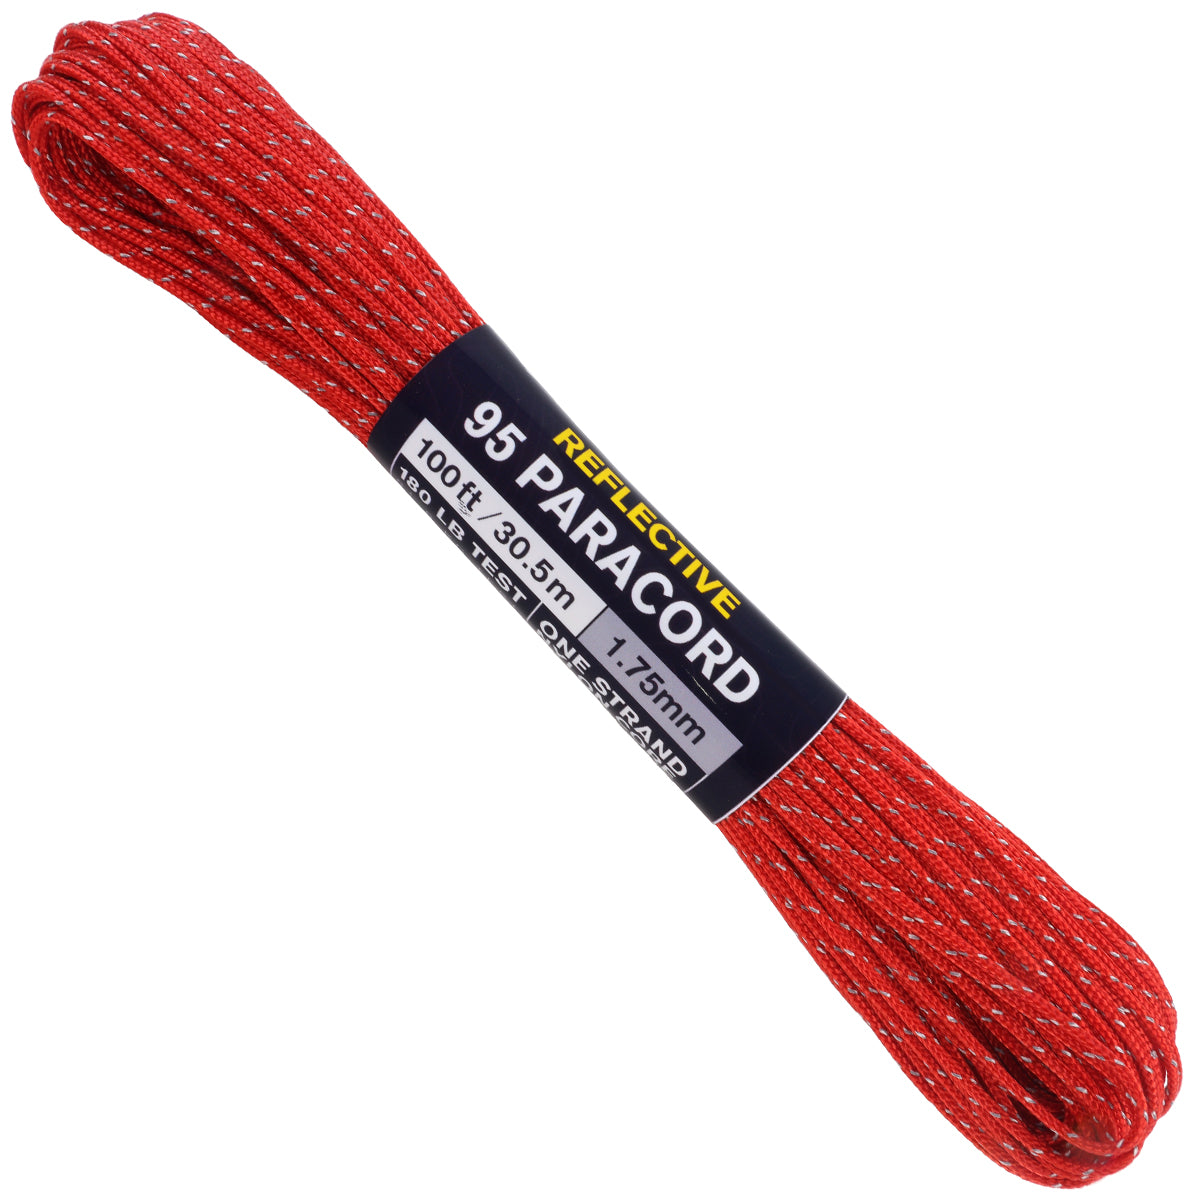 95 Paracord - Red Reflective – Atwood Rope MFG